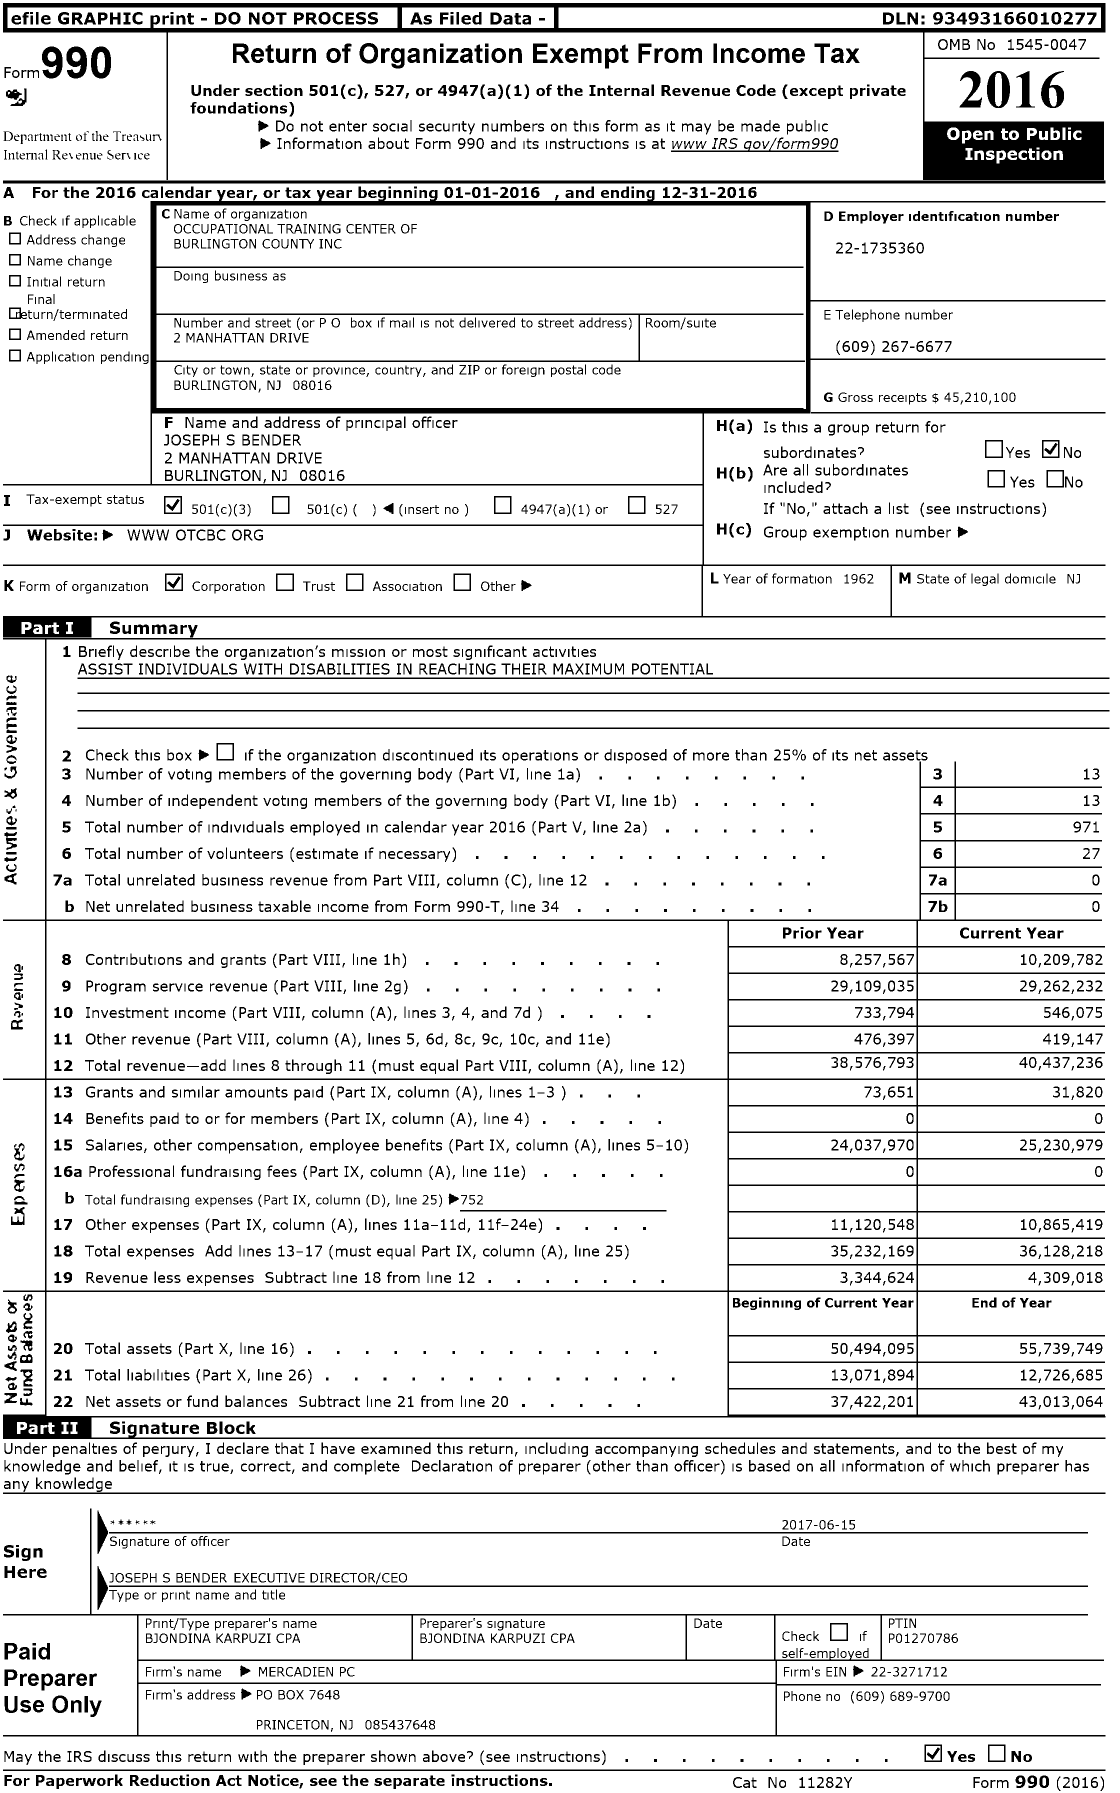 Image of first page of 2016 Form 990 for Occupational Training Center of Burlington County (OTC)